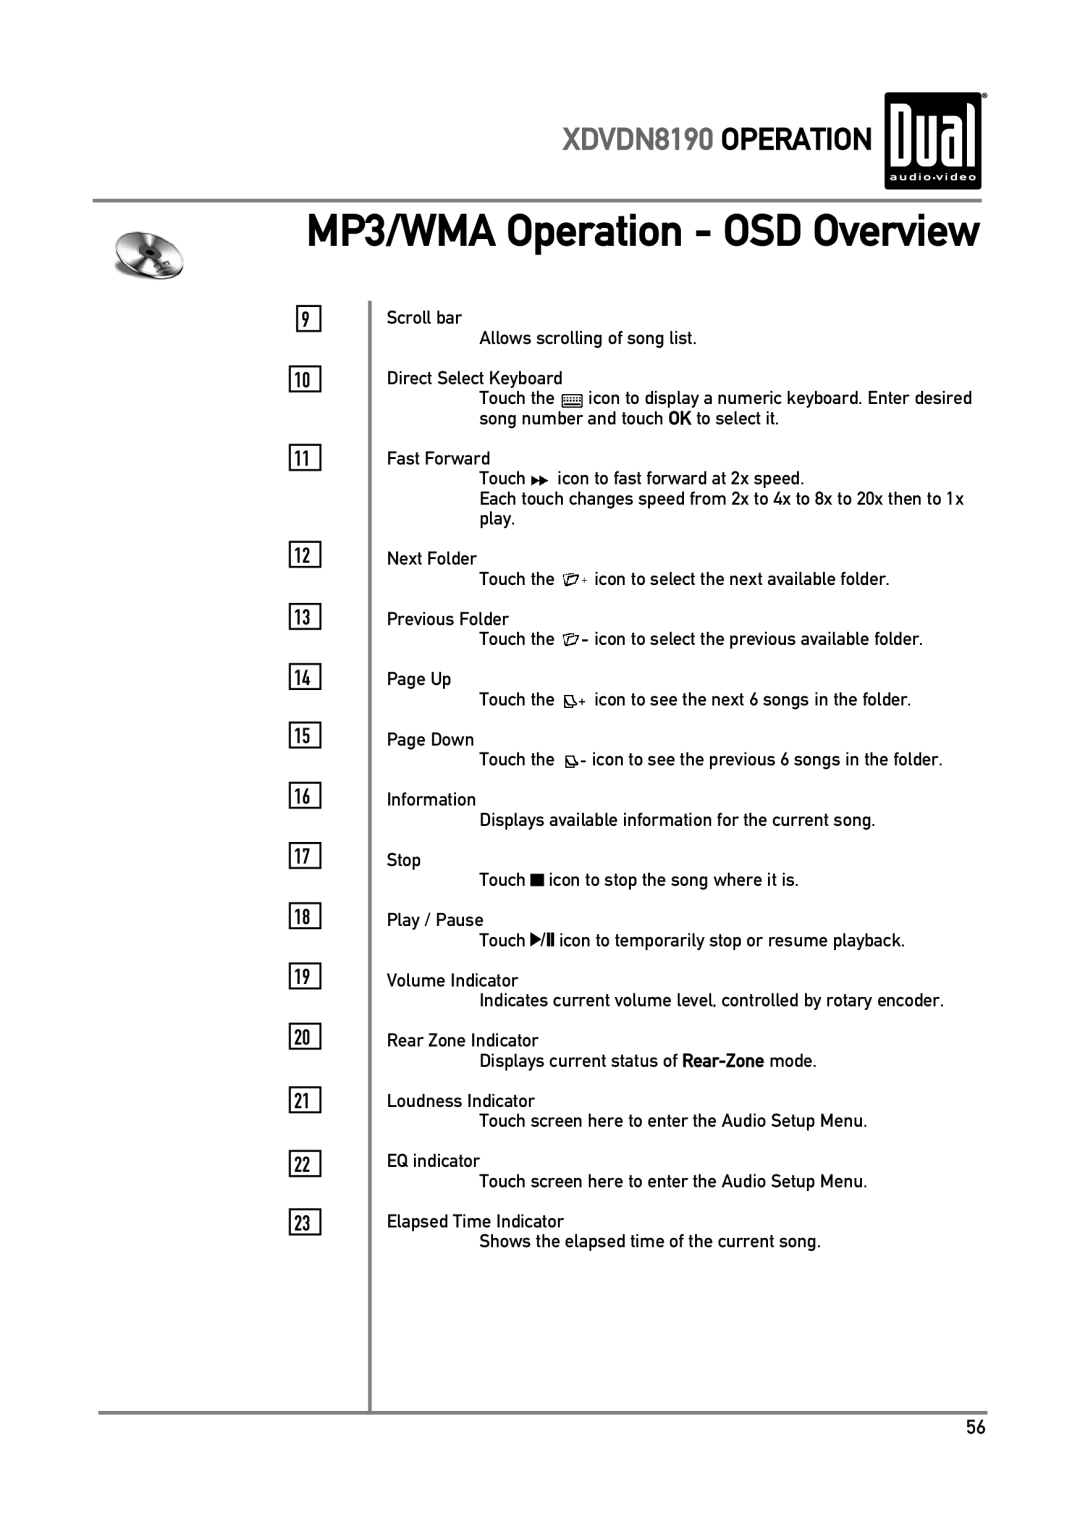 Dual owner manual MP3/WMA Operation - OSD Overview, XDVDN8190 OPERATION, Scroll bar Allows scrolling of song list 